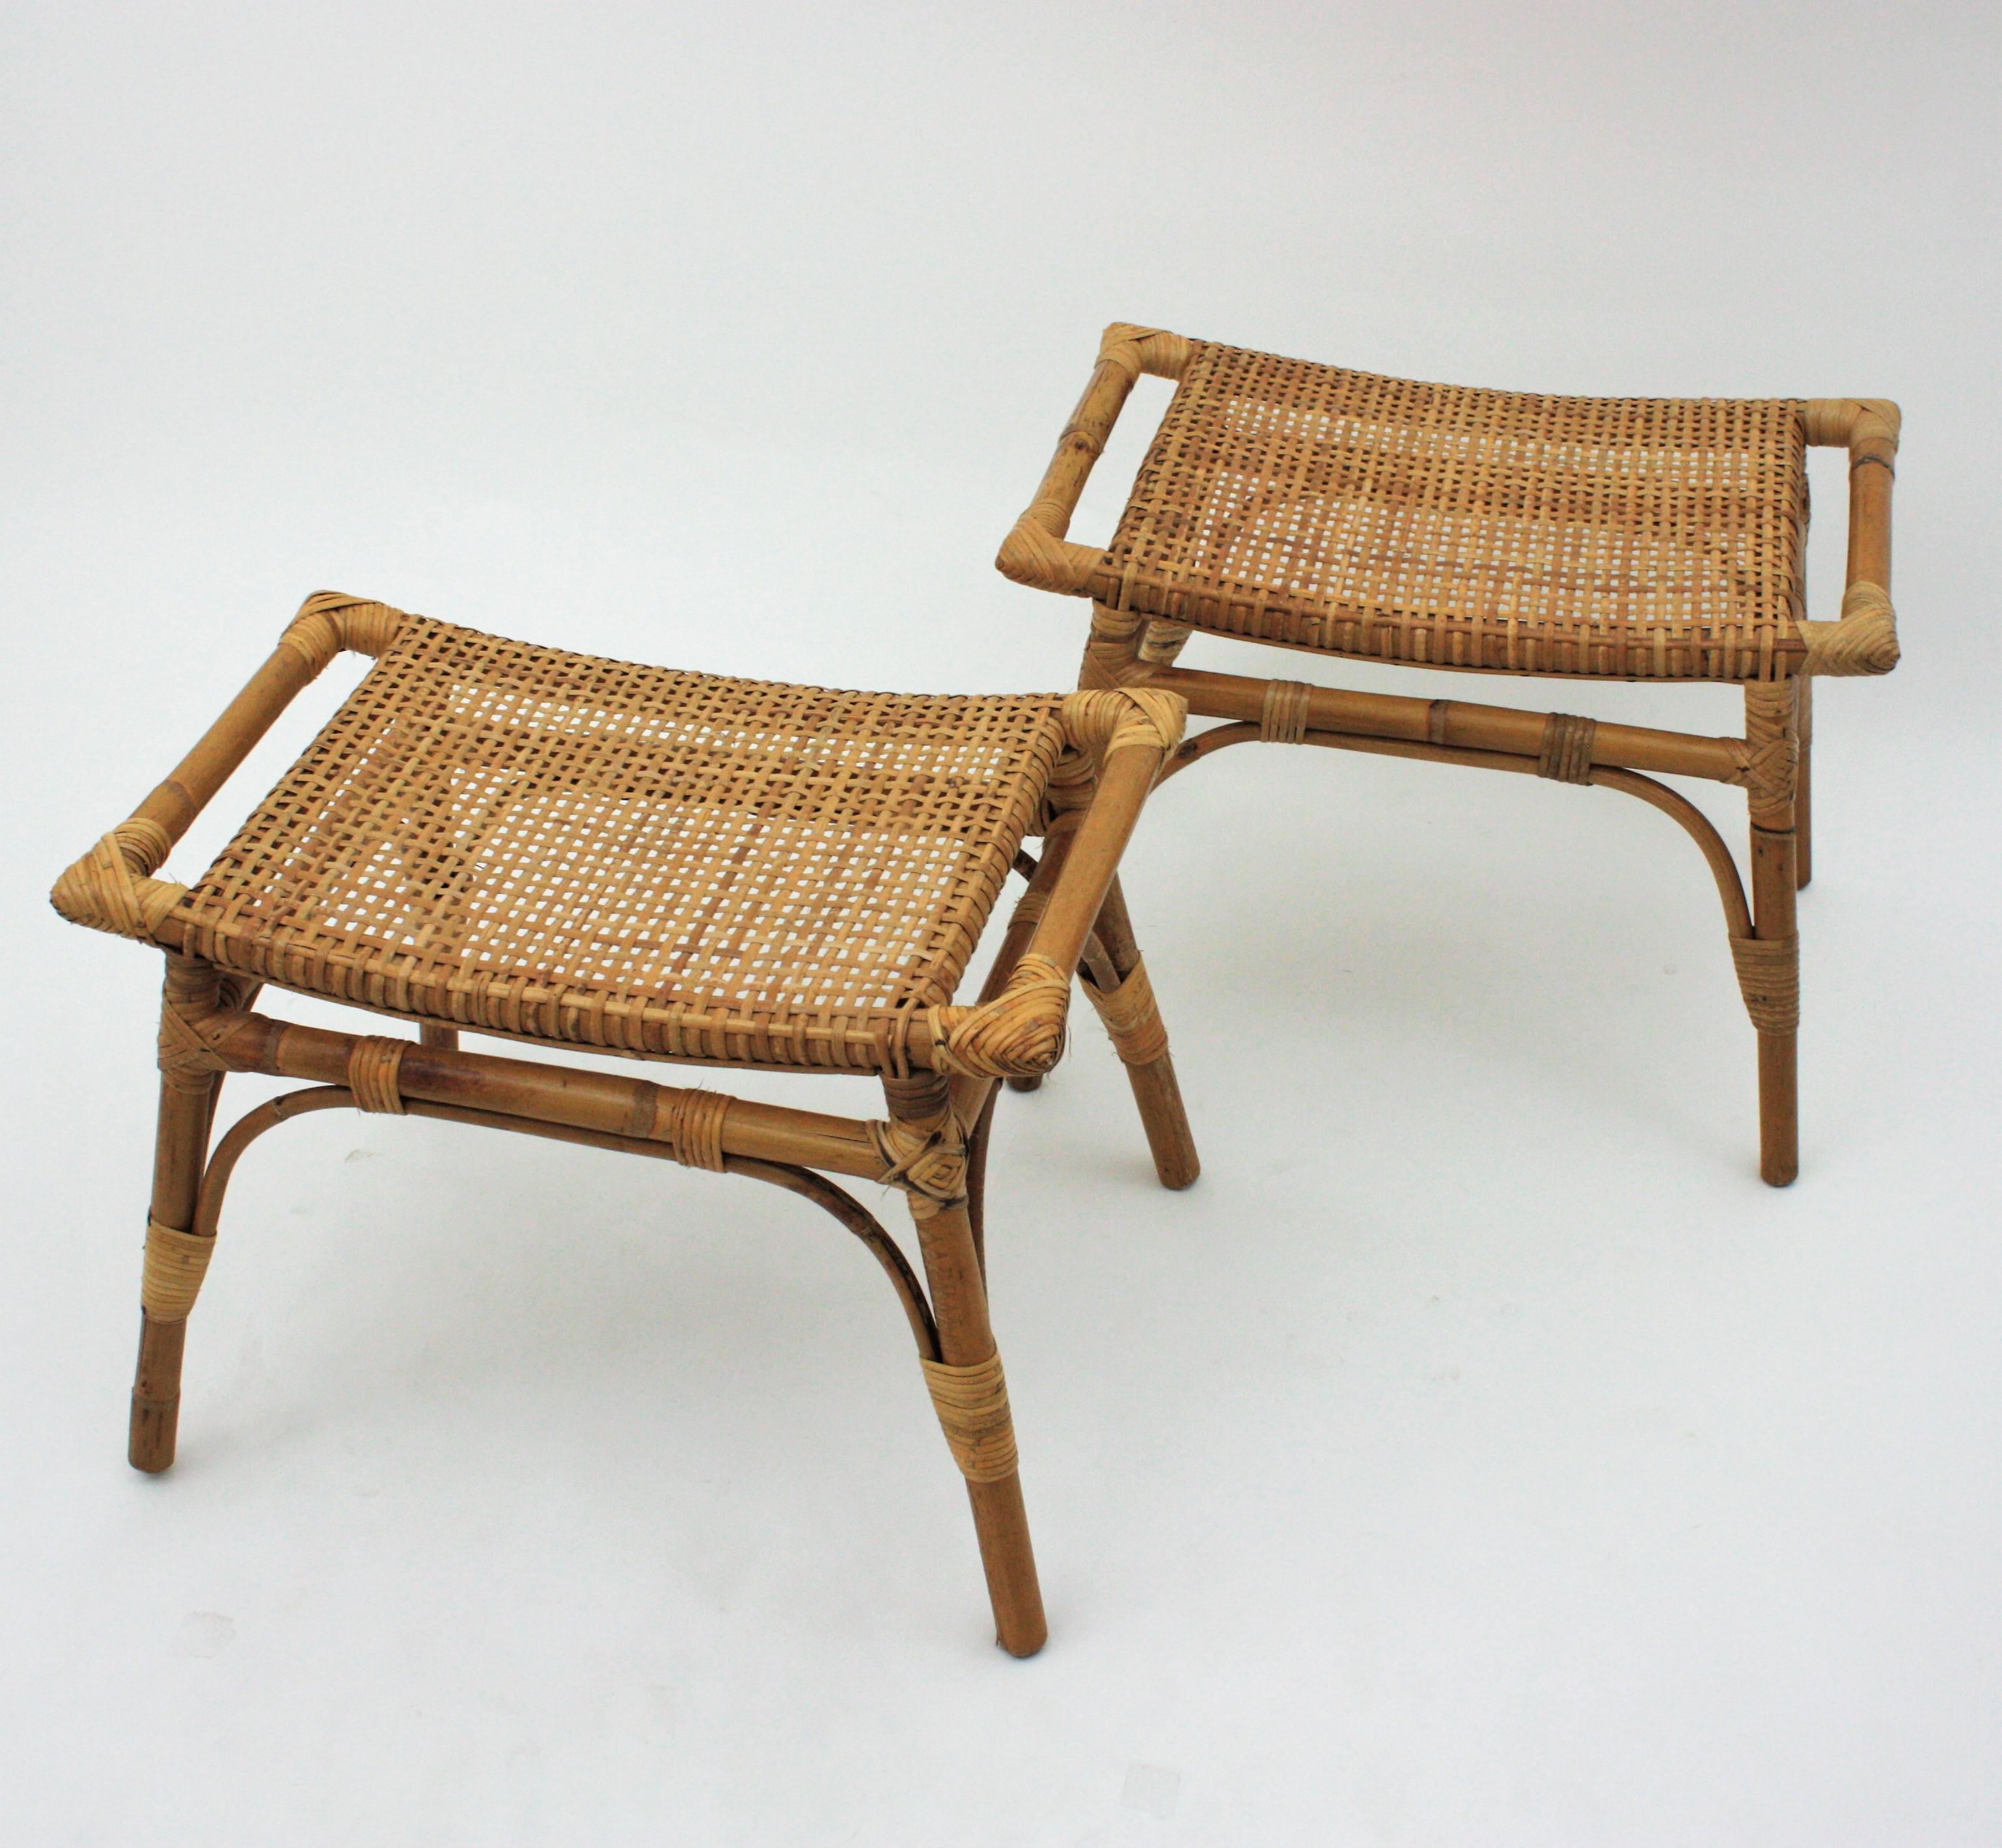 Eye-catching pair of modernist bamboo and woven rattan / wicker rectangular stools or small benches, Spain, 1960s.
These stools have a design with handles at both sides inspired in Hans J Wegner stools.
Very well constructed all made by hand with